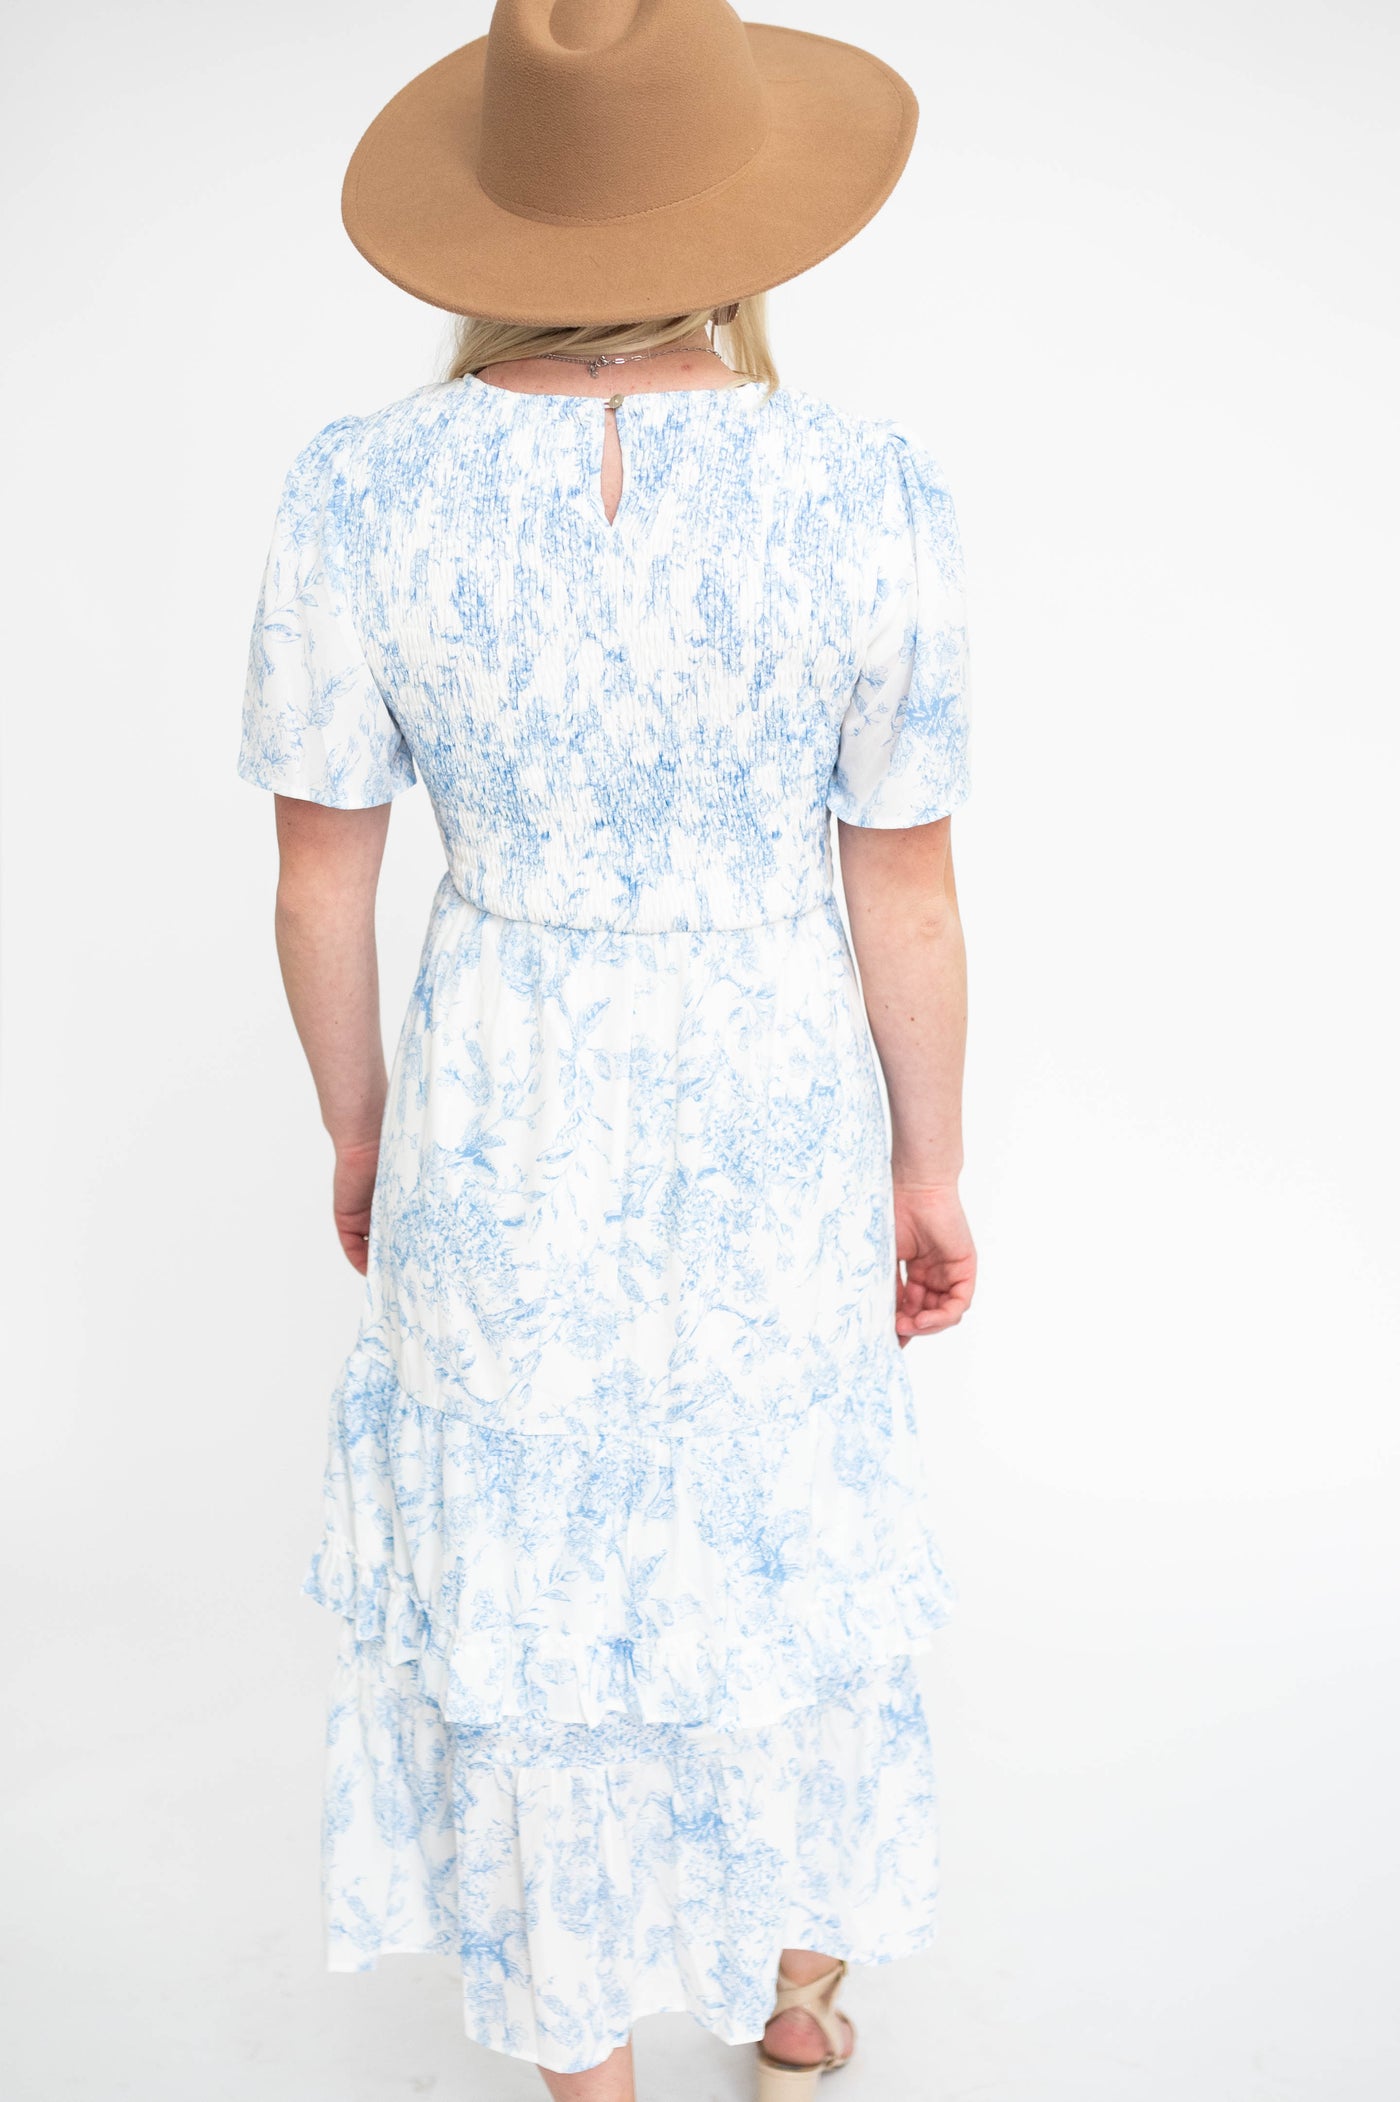 Back view of a blue floral dress